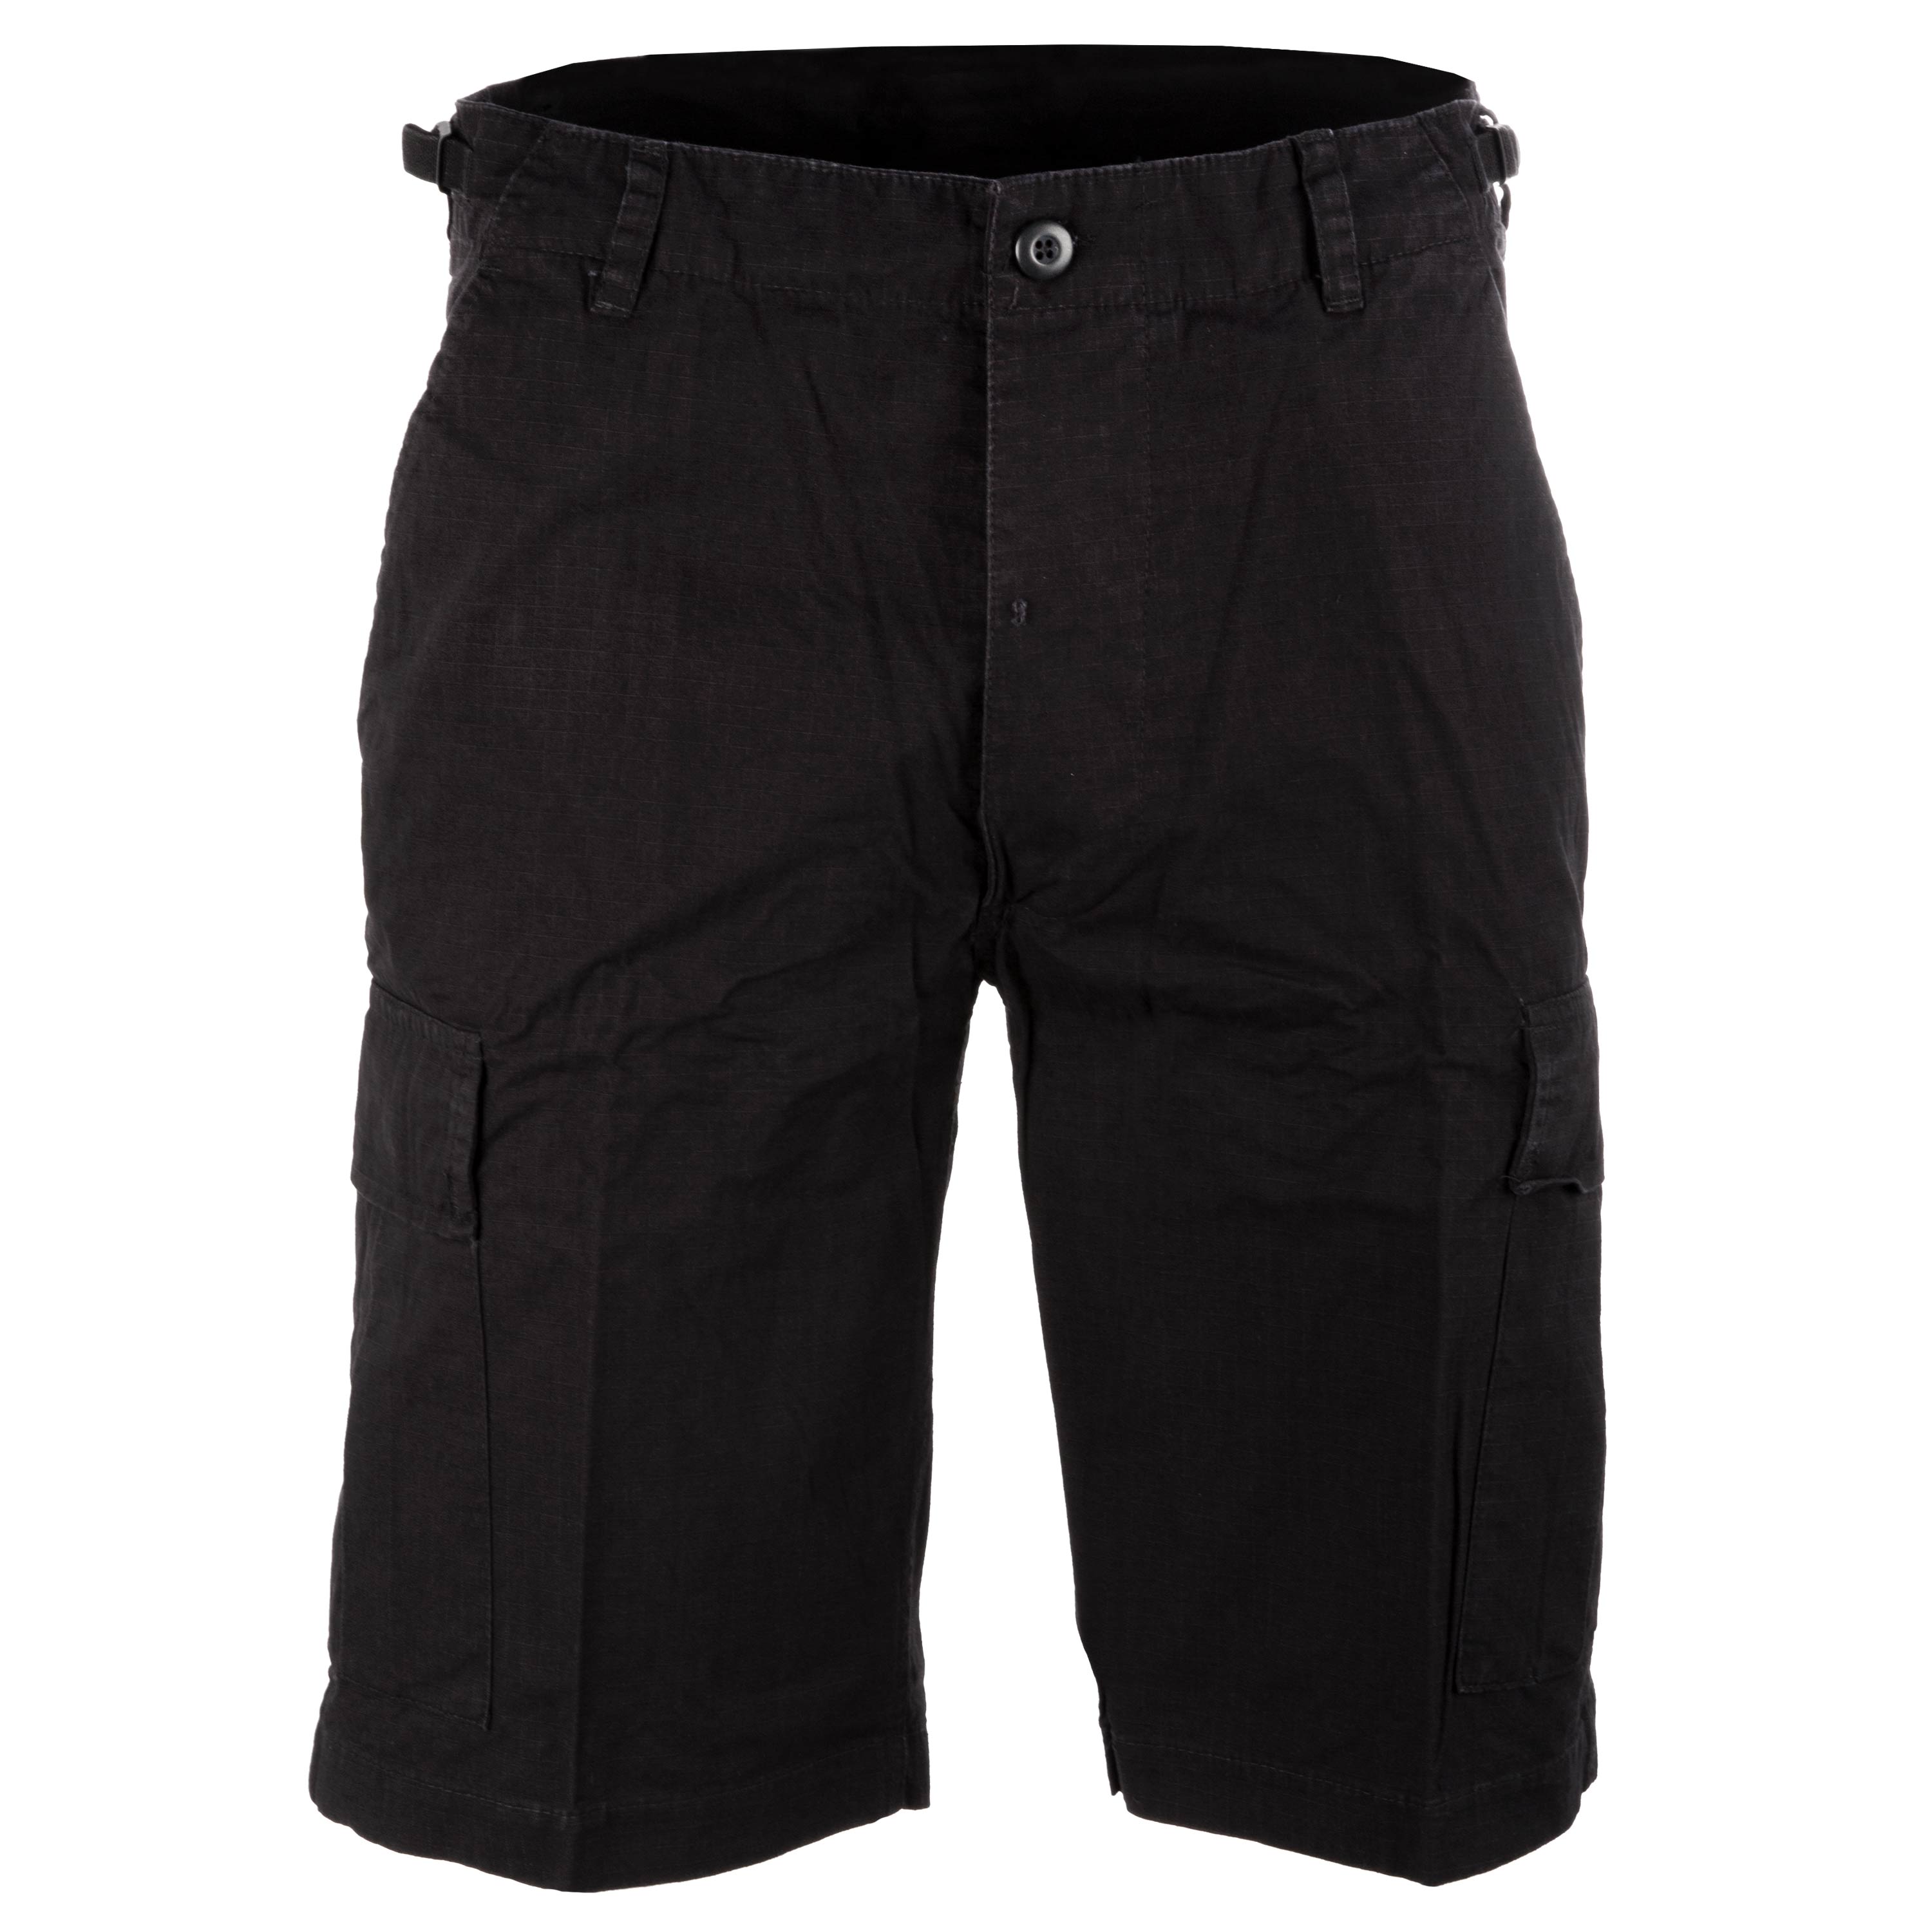 Purchase the Bermuda Shorts Rip-Stop Washed black by ASMC